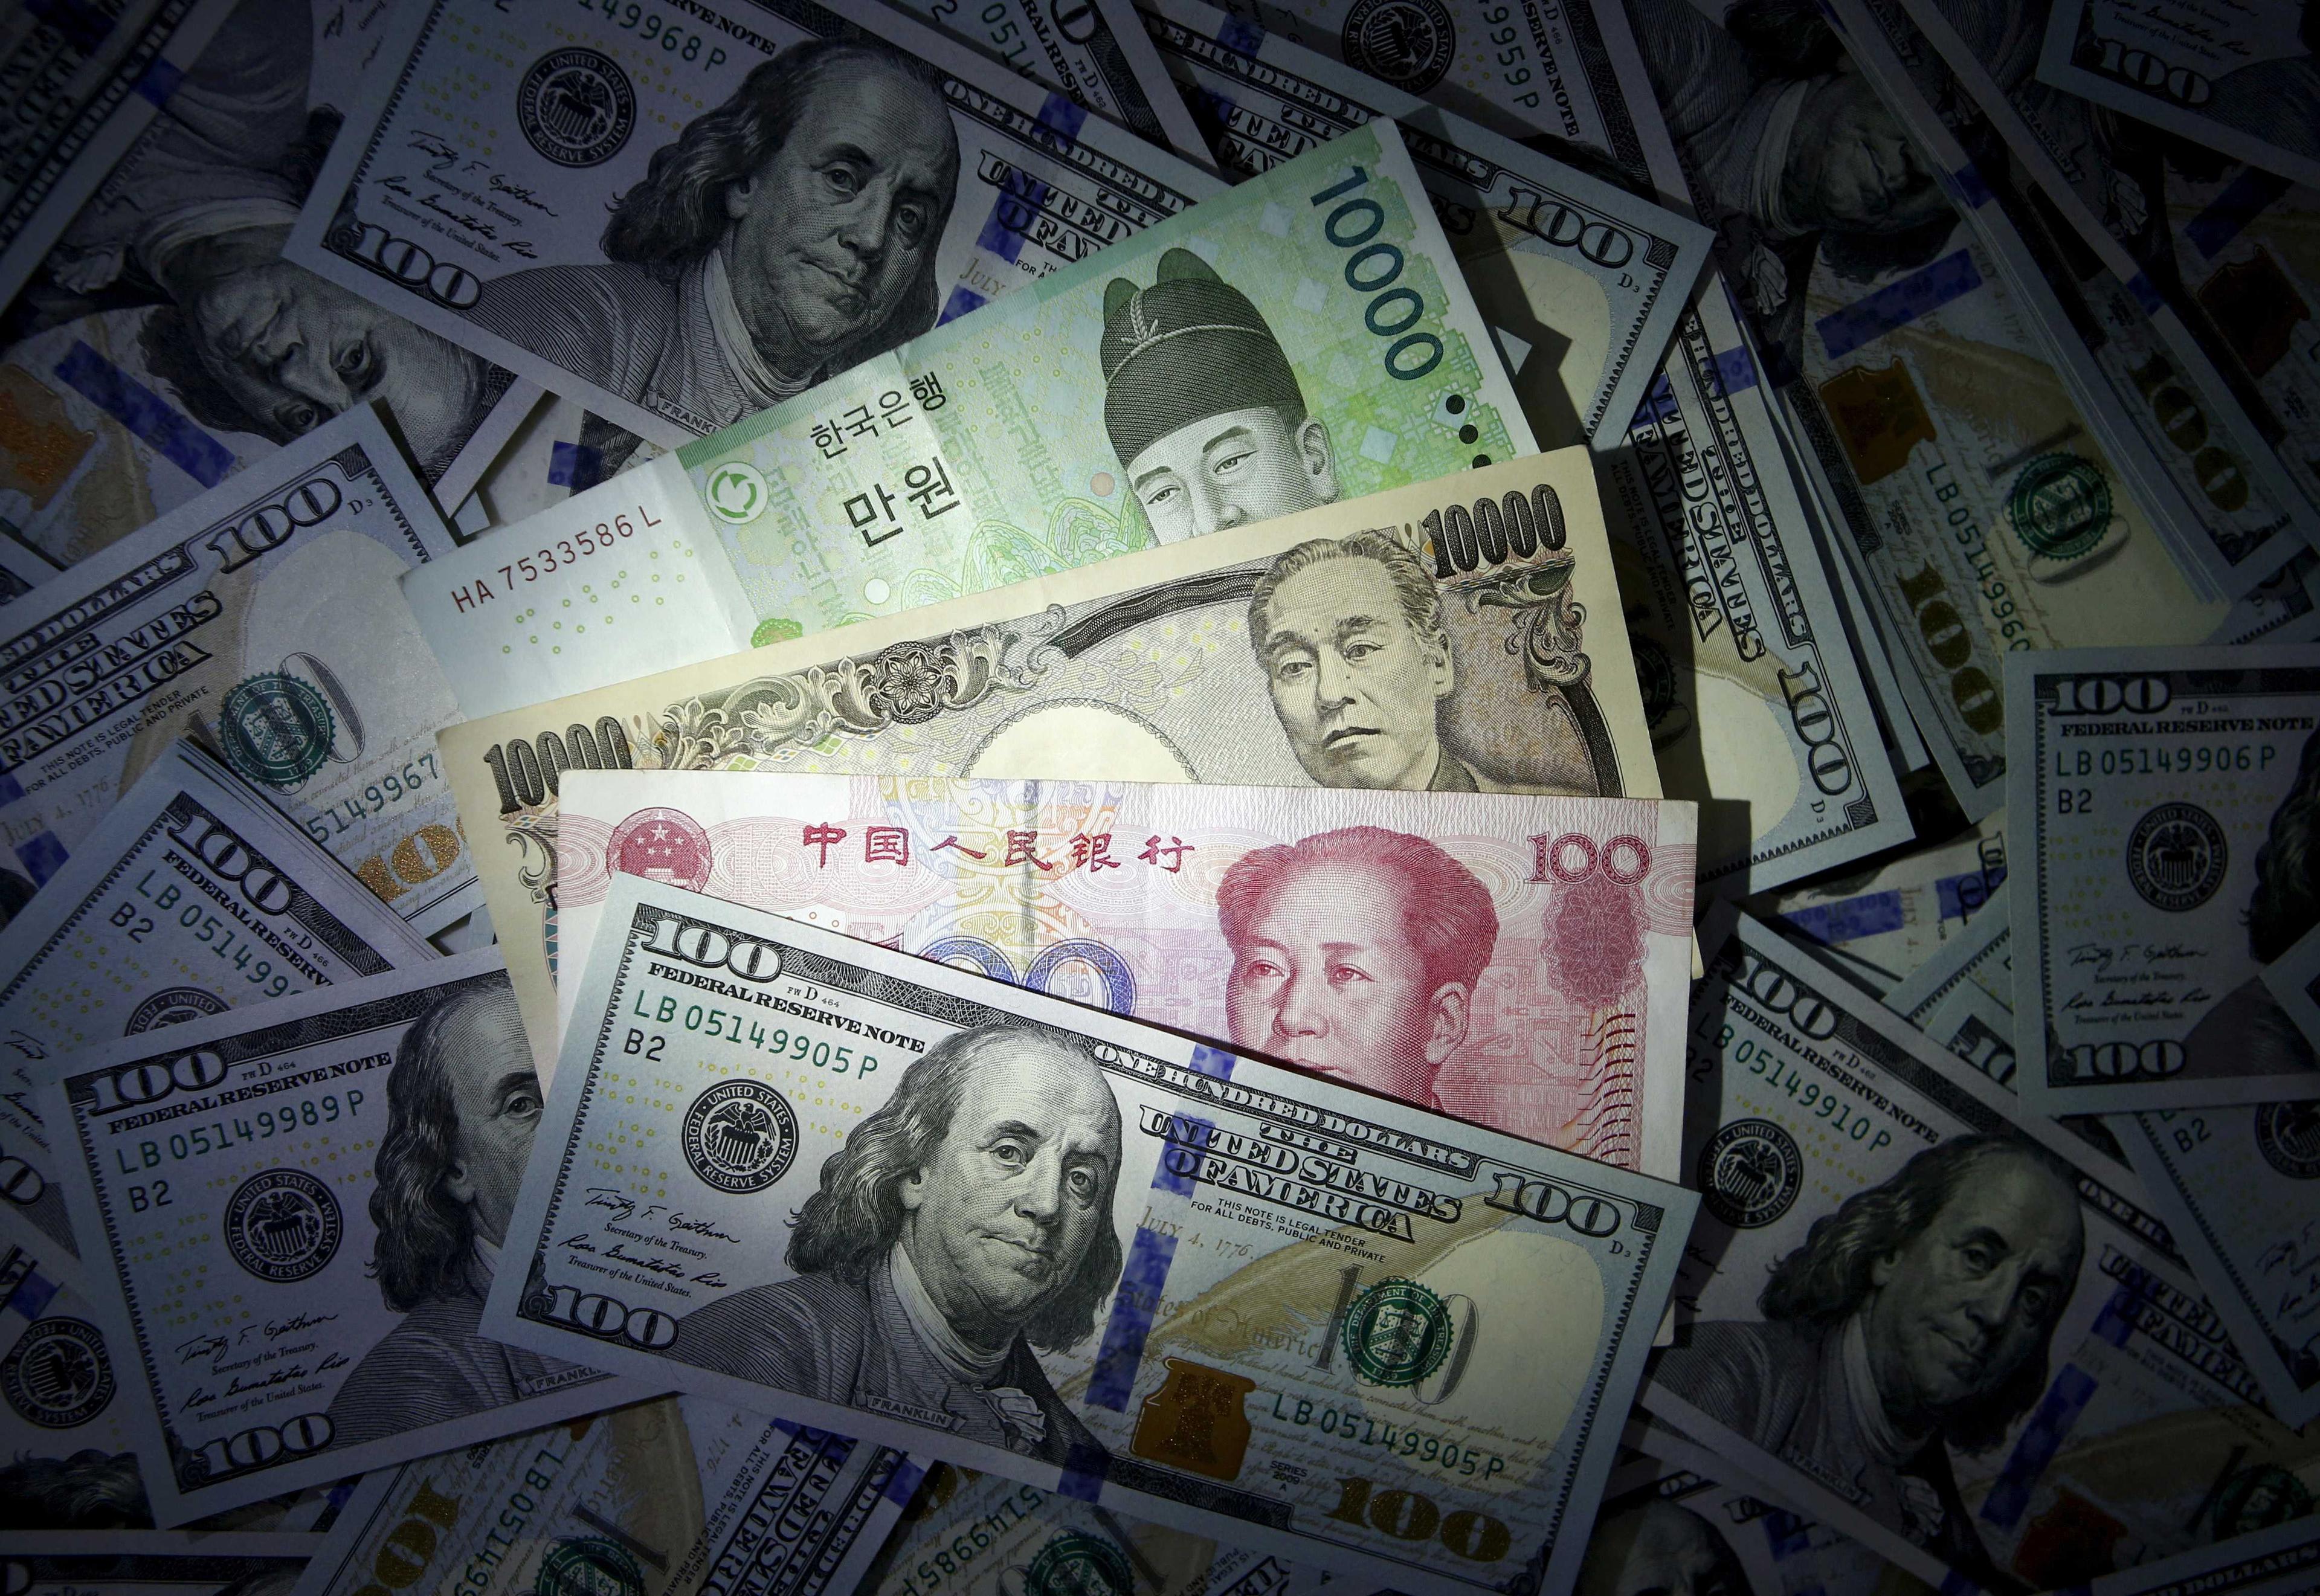 South Korean won, Chinese yuan and Japanese yen notes are seen on US 100 dollar notes in this illustration shot Dec 15, 2015. Photo: Reuters